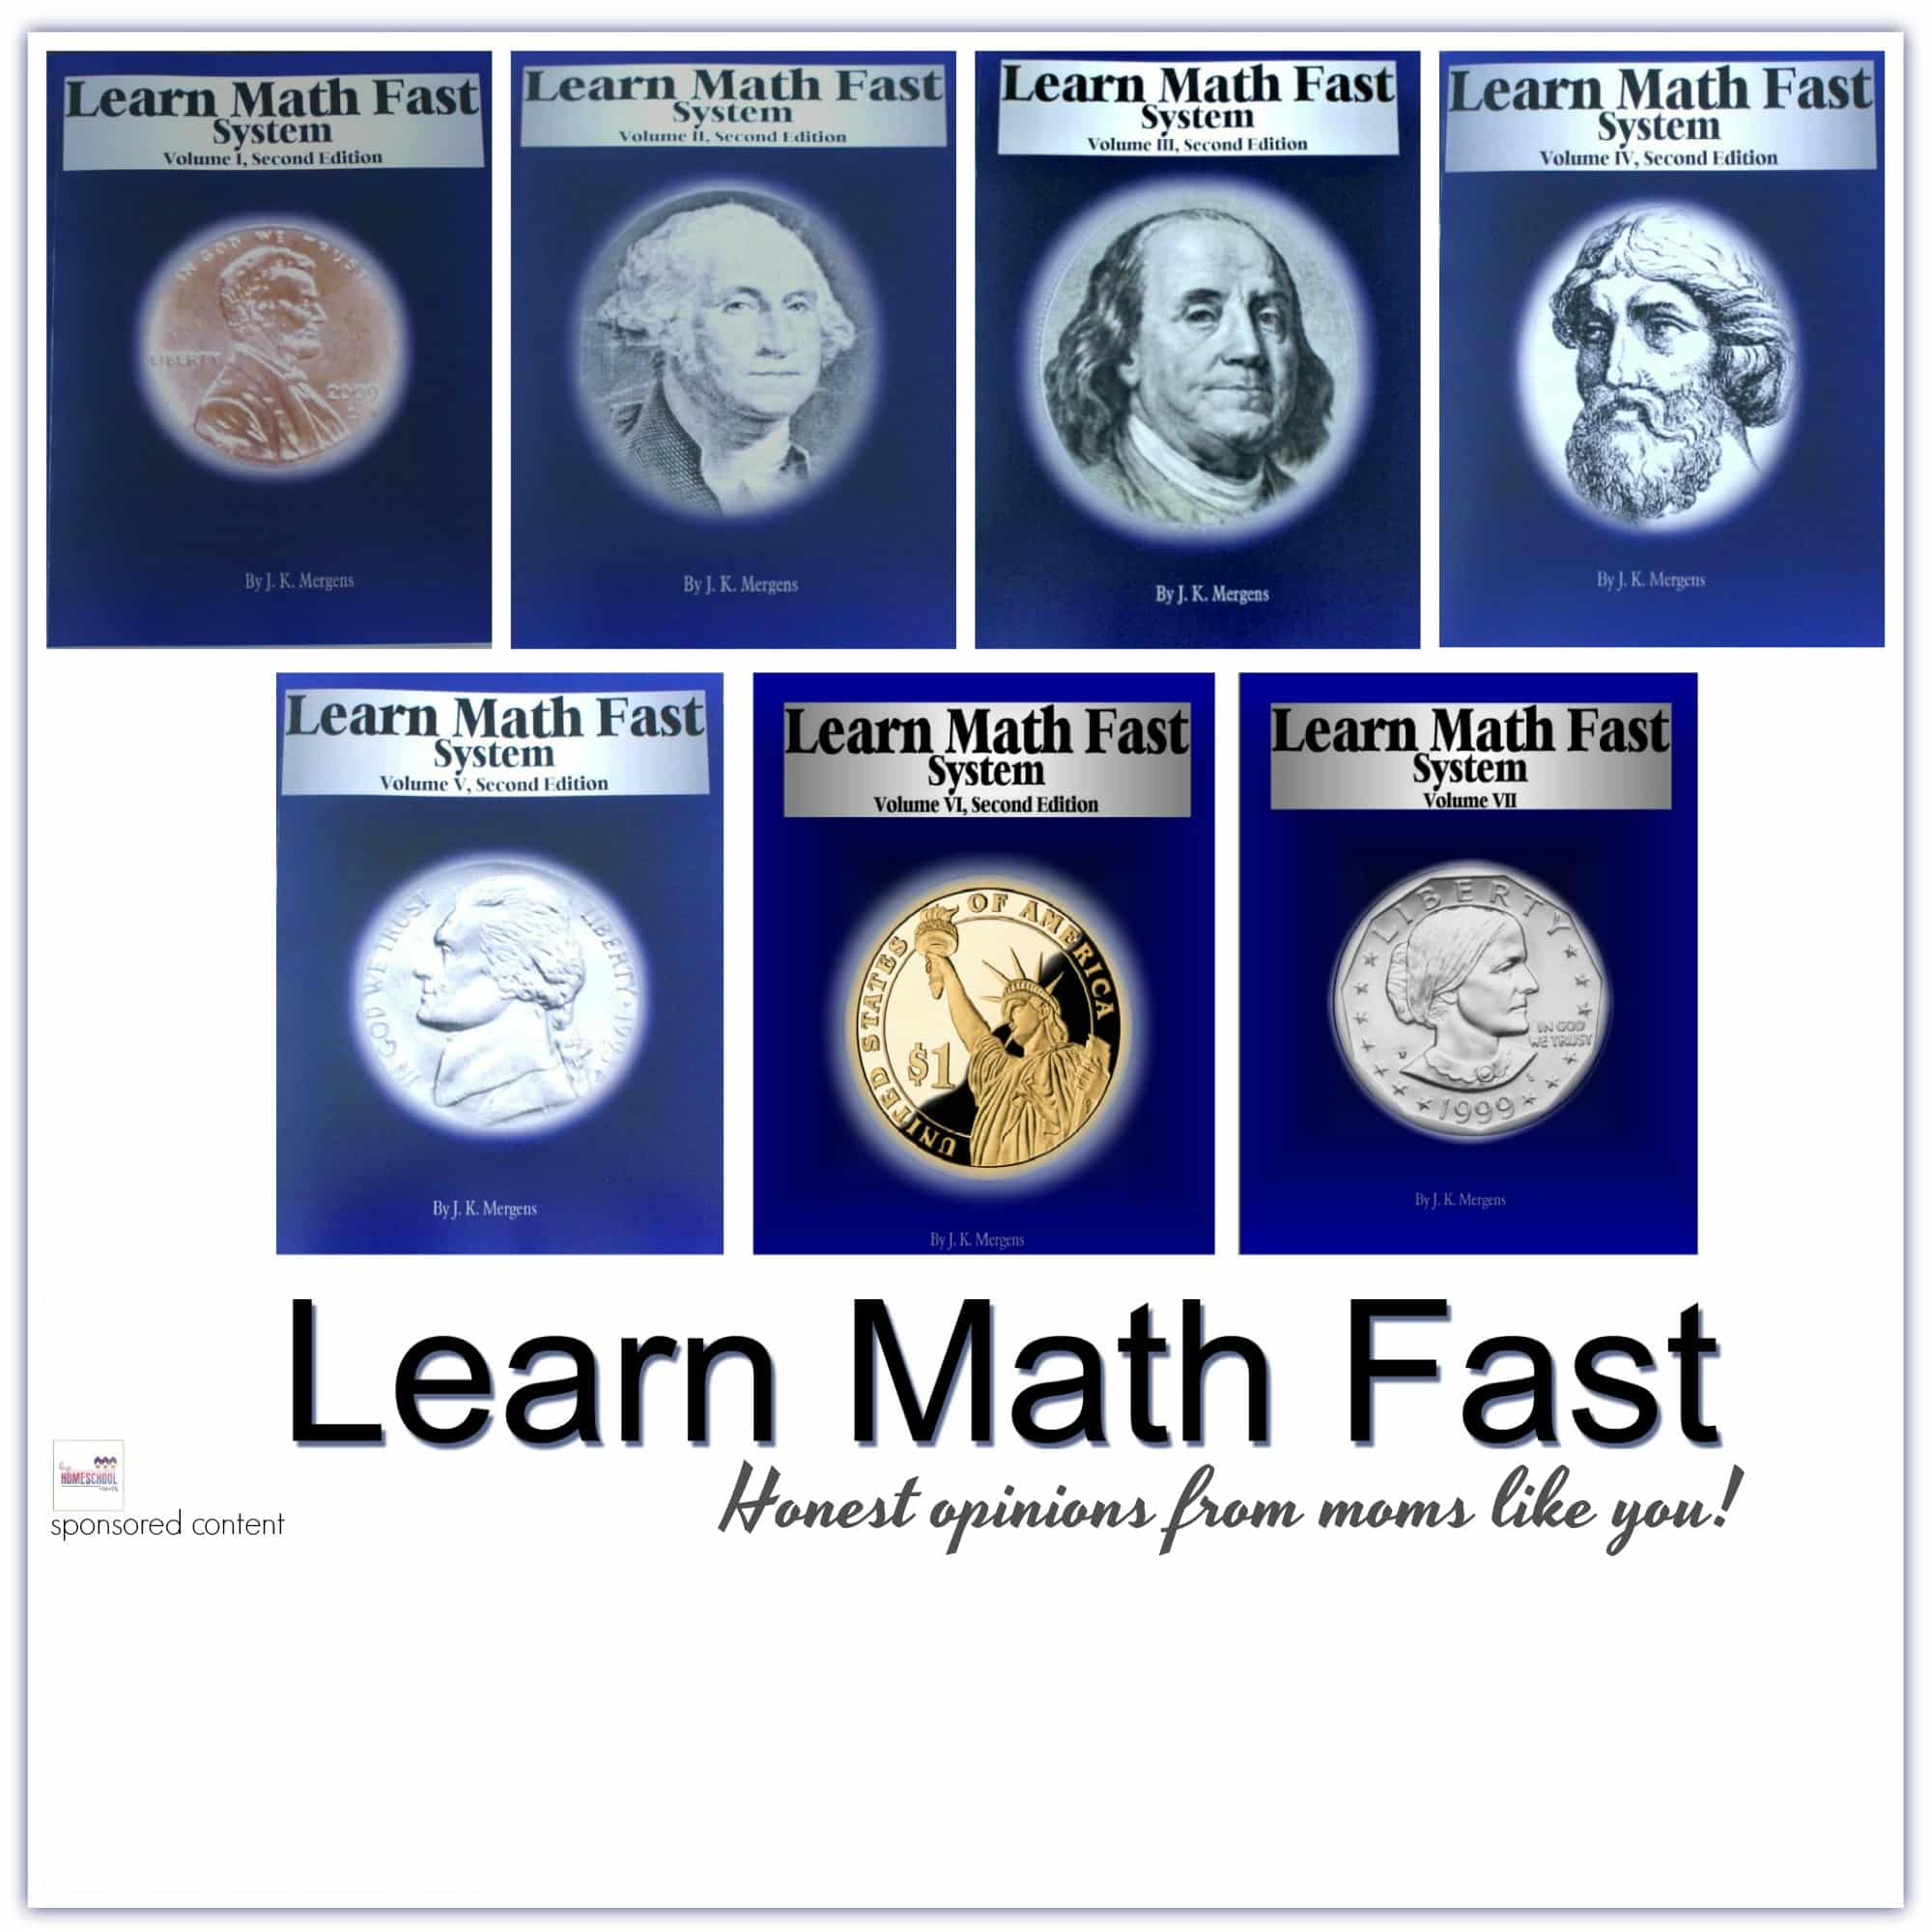 Does your child struggle with math? Try Learn Math Fast to help catch up!